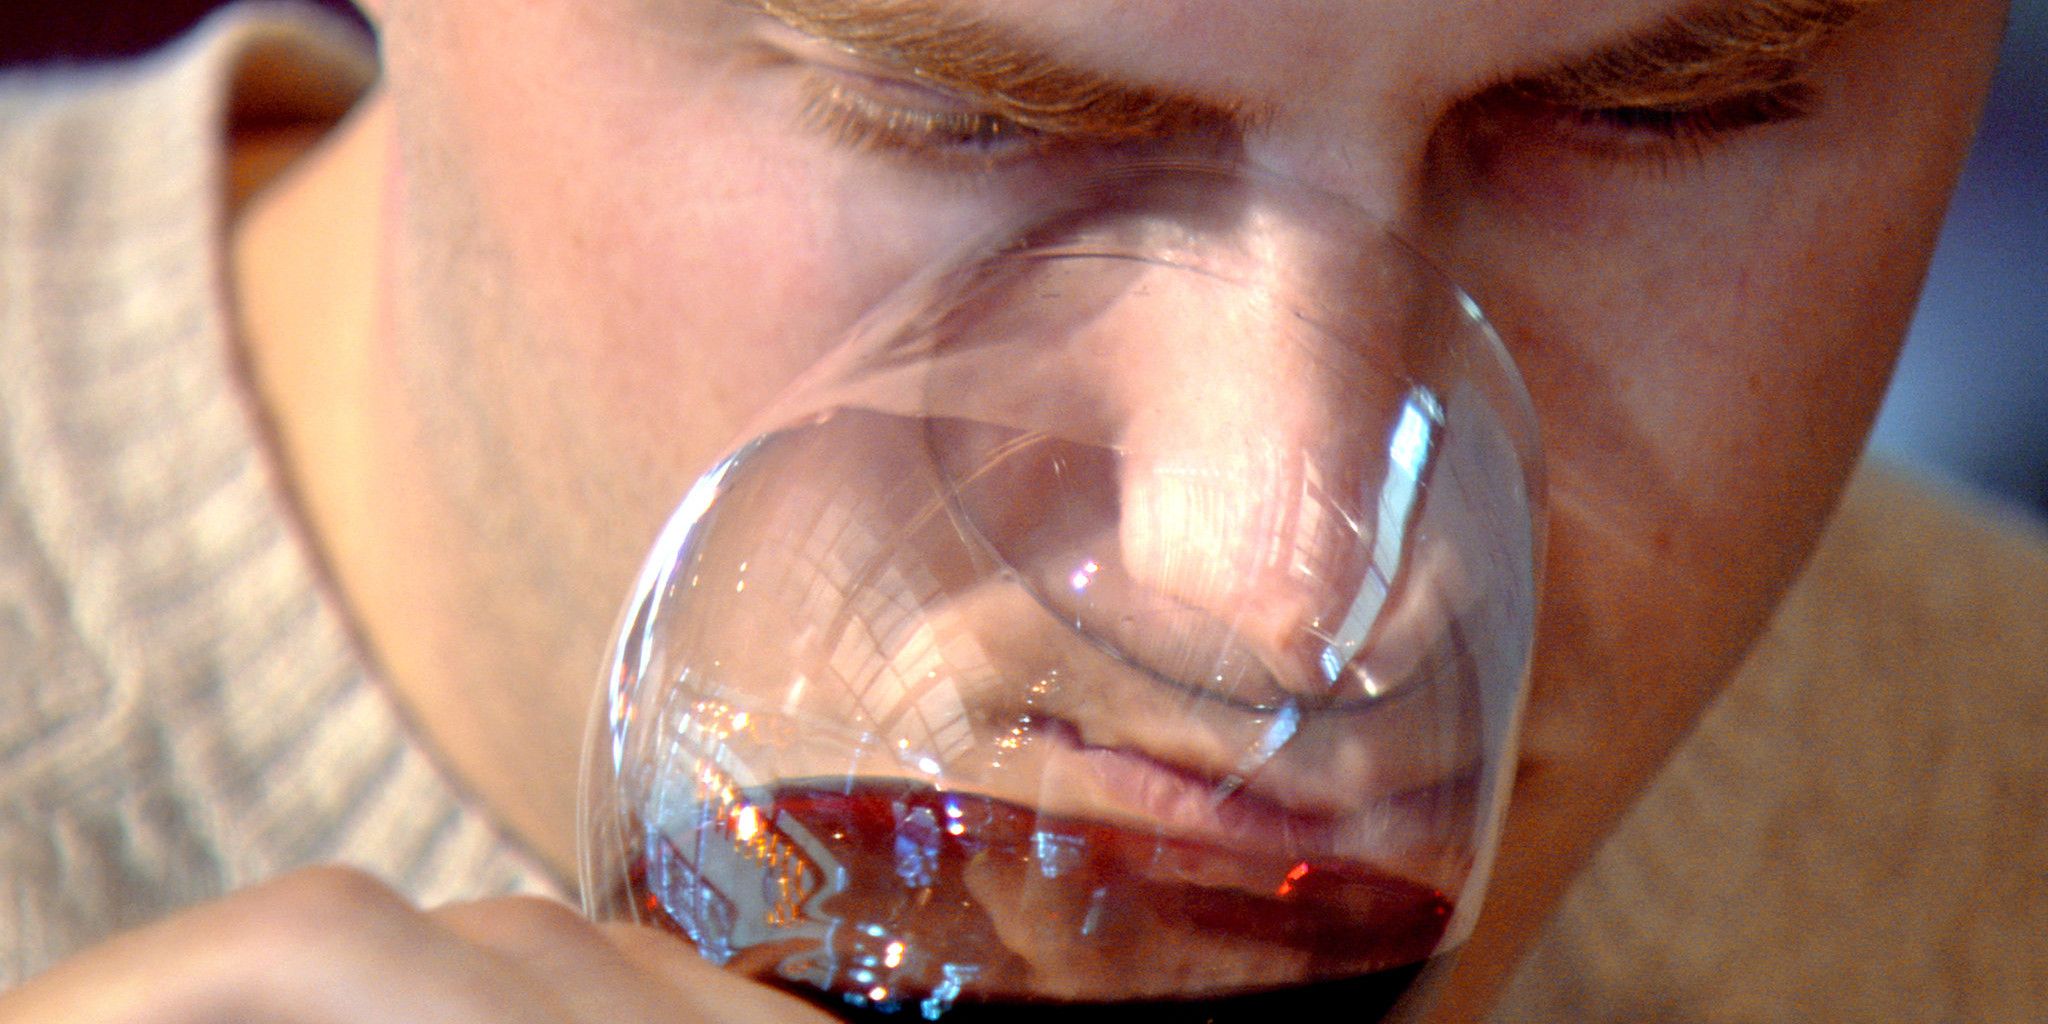 An applicant to be a Master Somm sniffs wine in the doc "Somm."